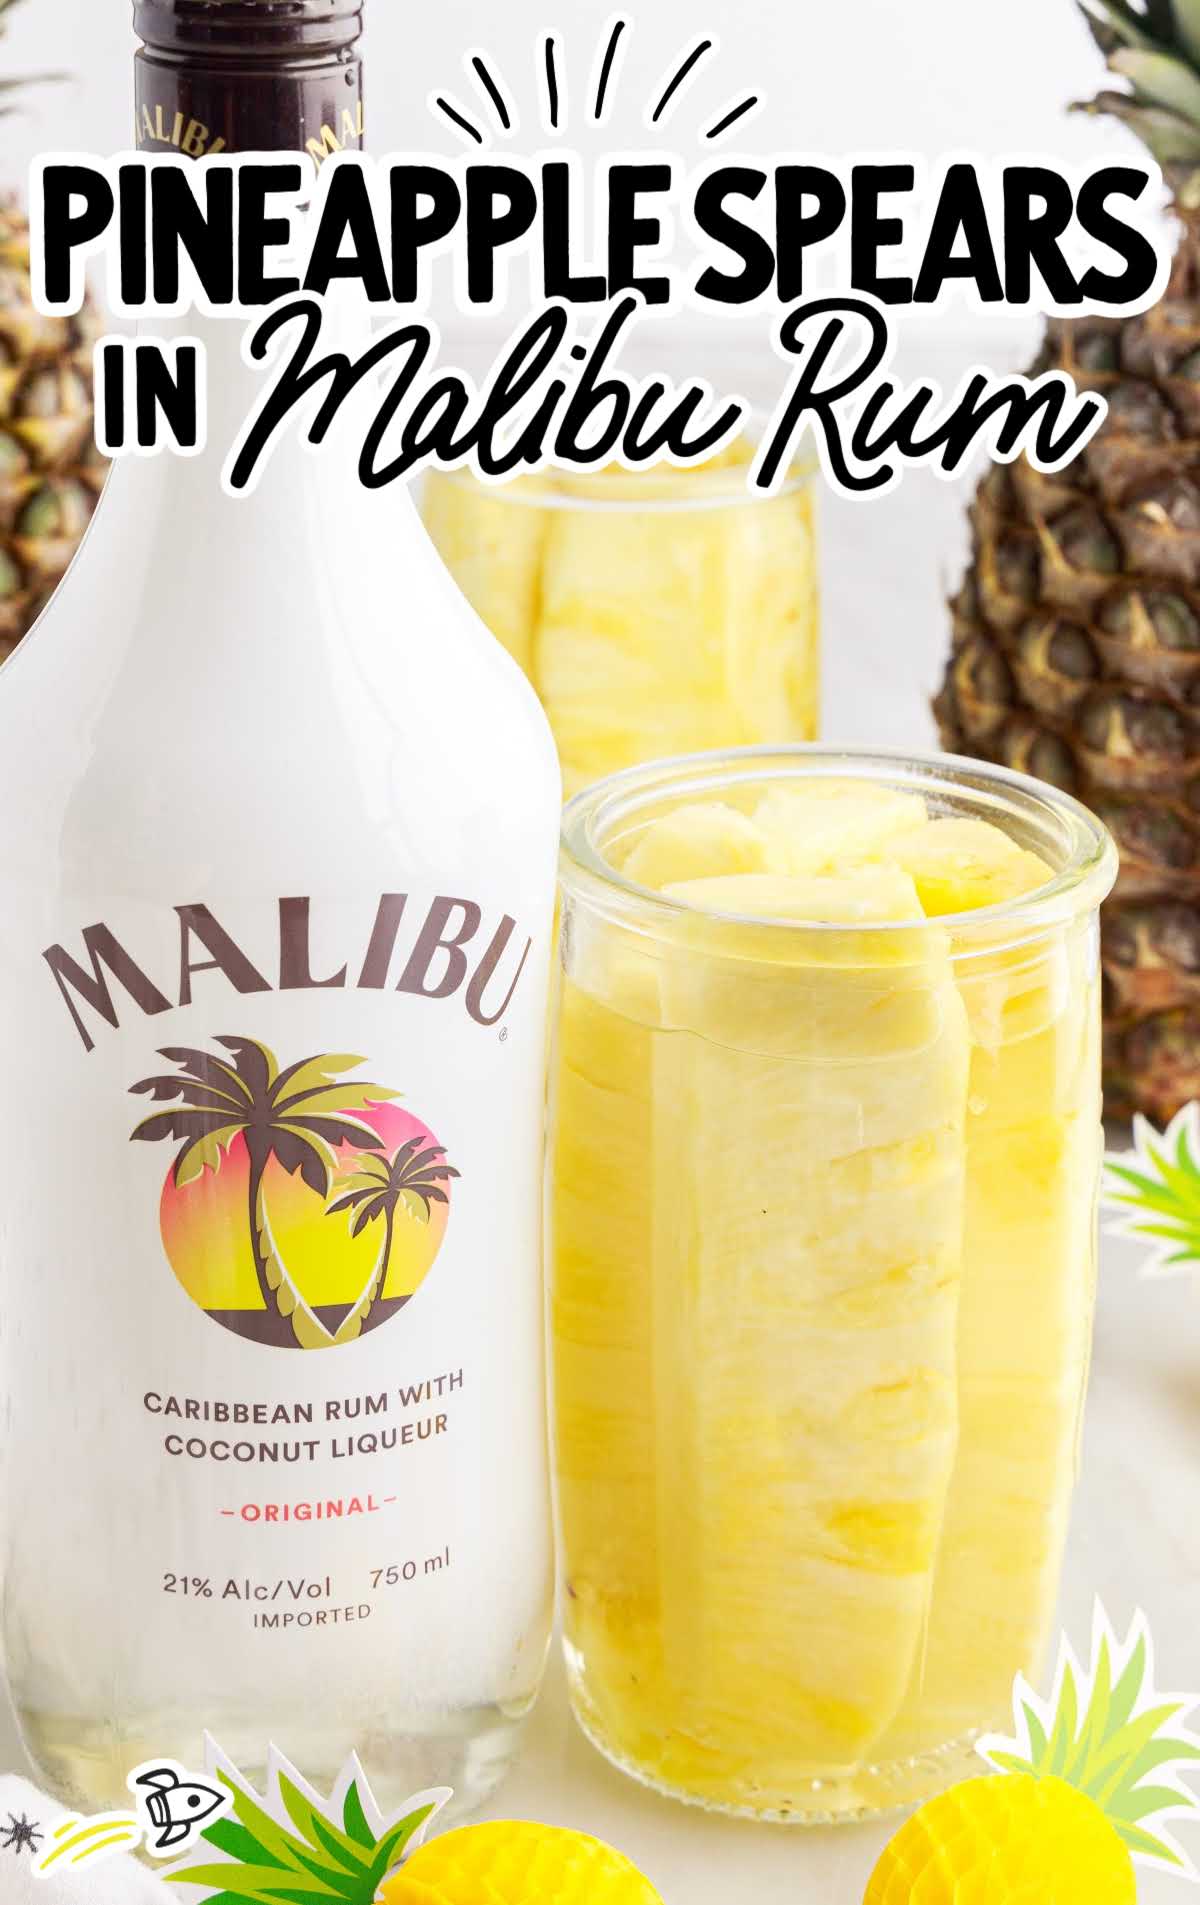 a tall container of Pineapple Spears in Malibu Rum with a bottle of Malibu